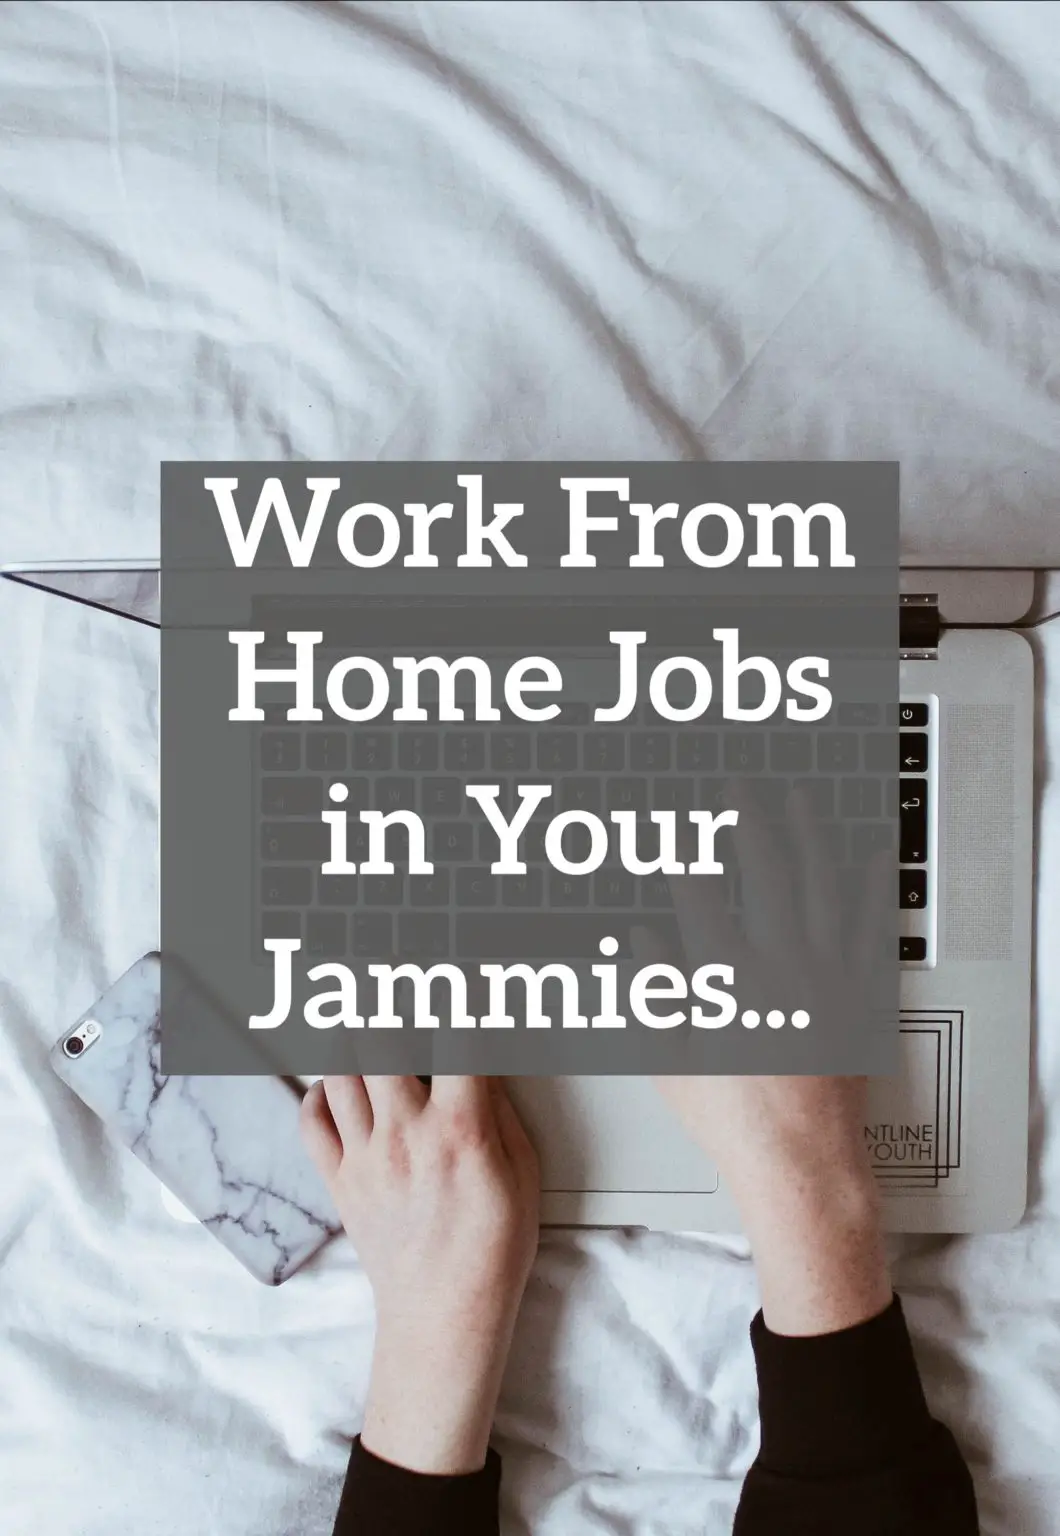 education work from home jobs near me